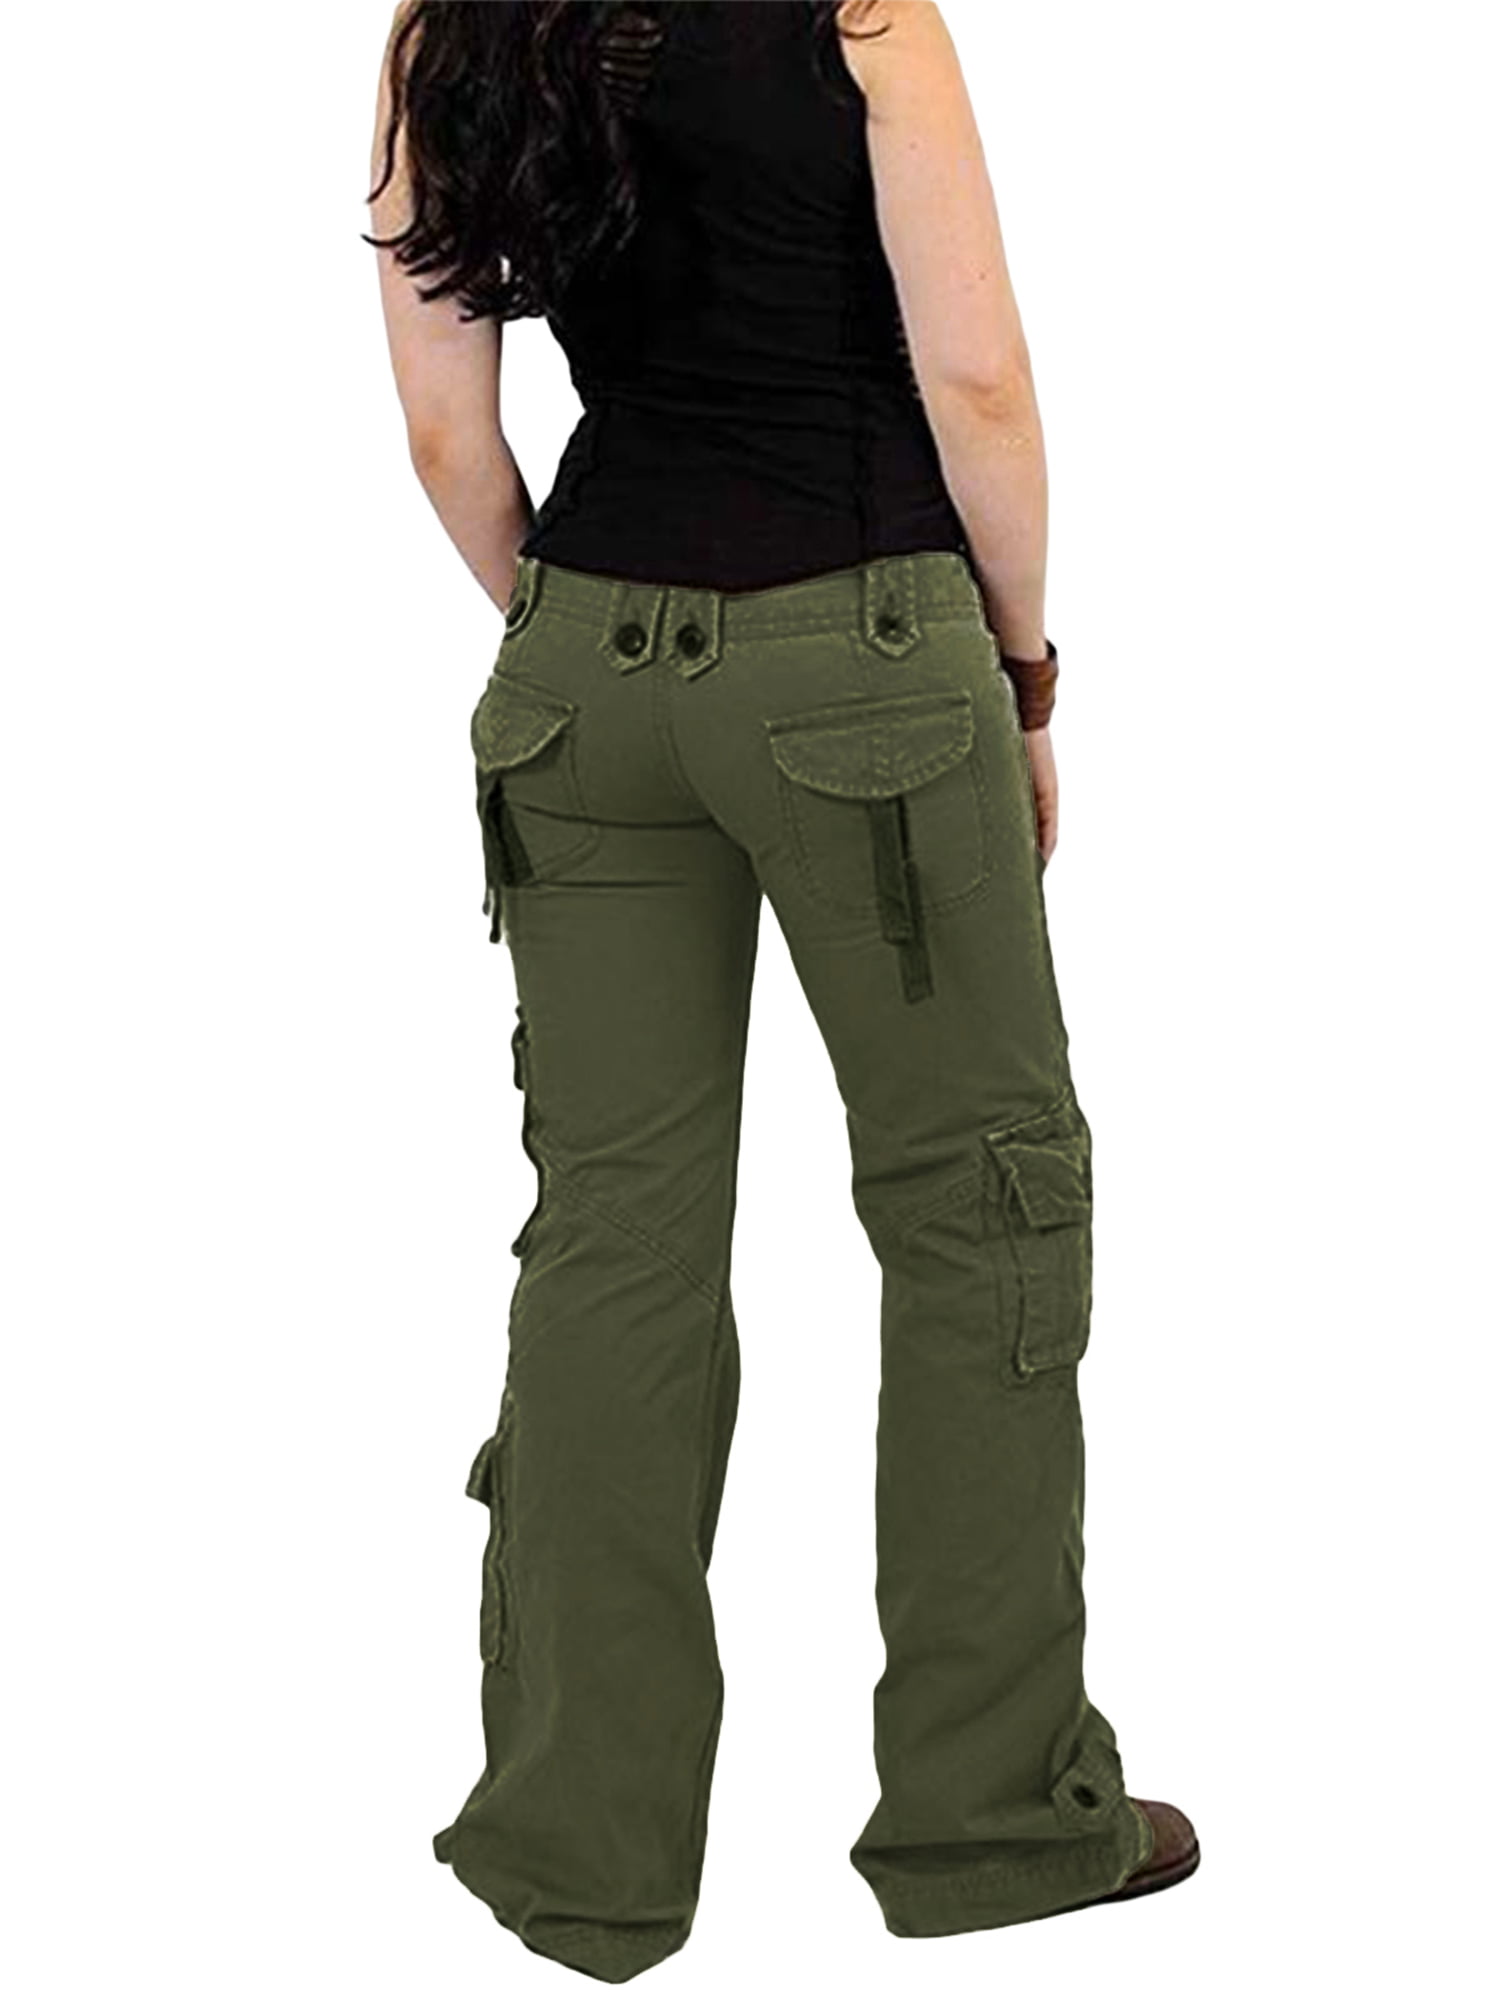 SUBH Womens Cargo Trouser A Perfect Style for Indoor and Outdoor